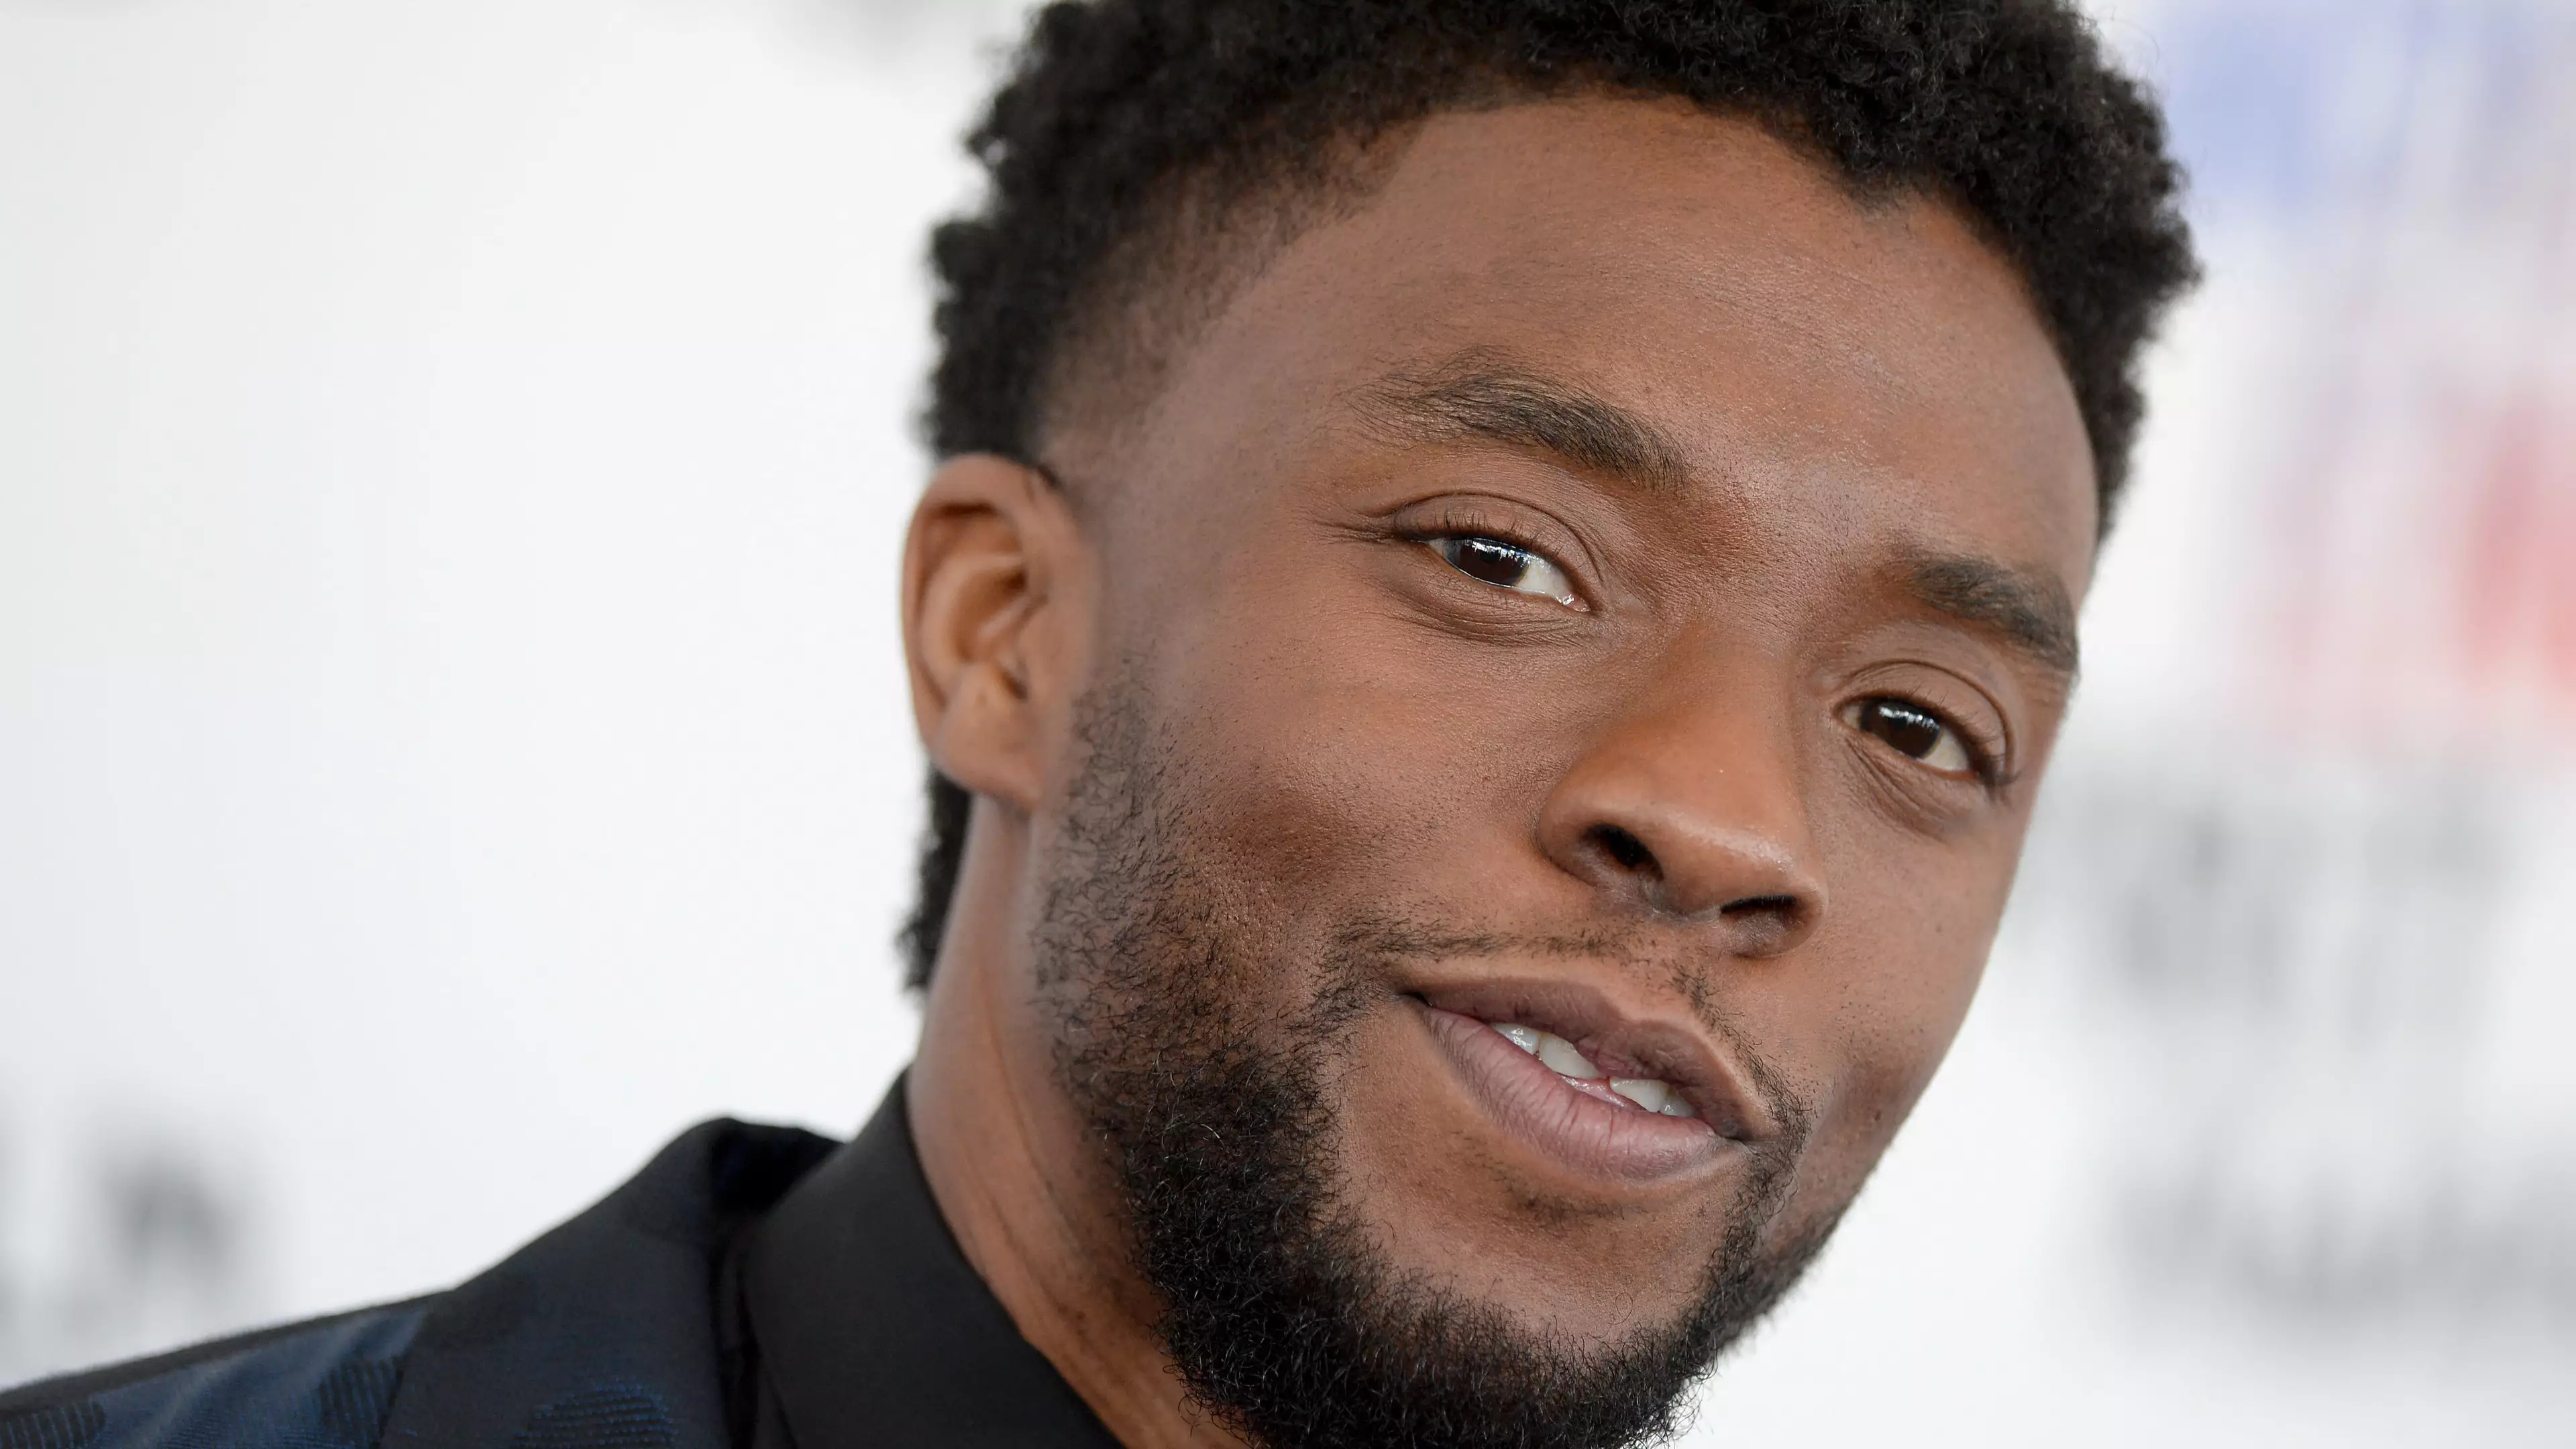 Dad Of Child That Chadwick Boseman Spoke About In Interview Shares Message He Sent To Son